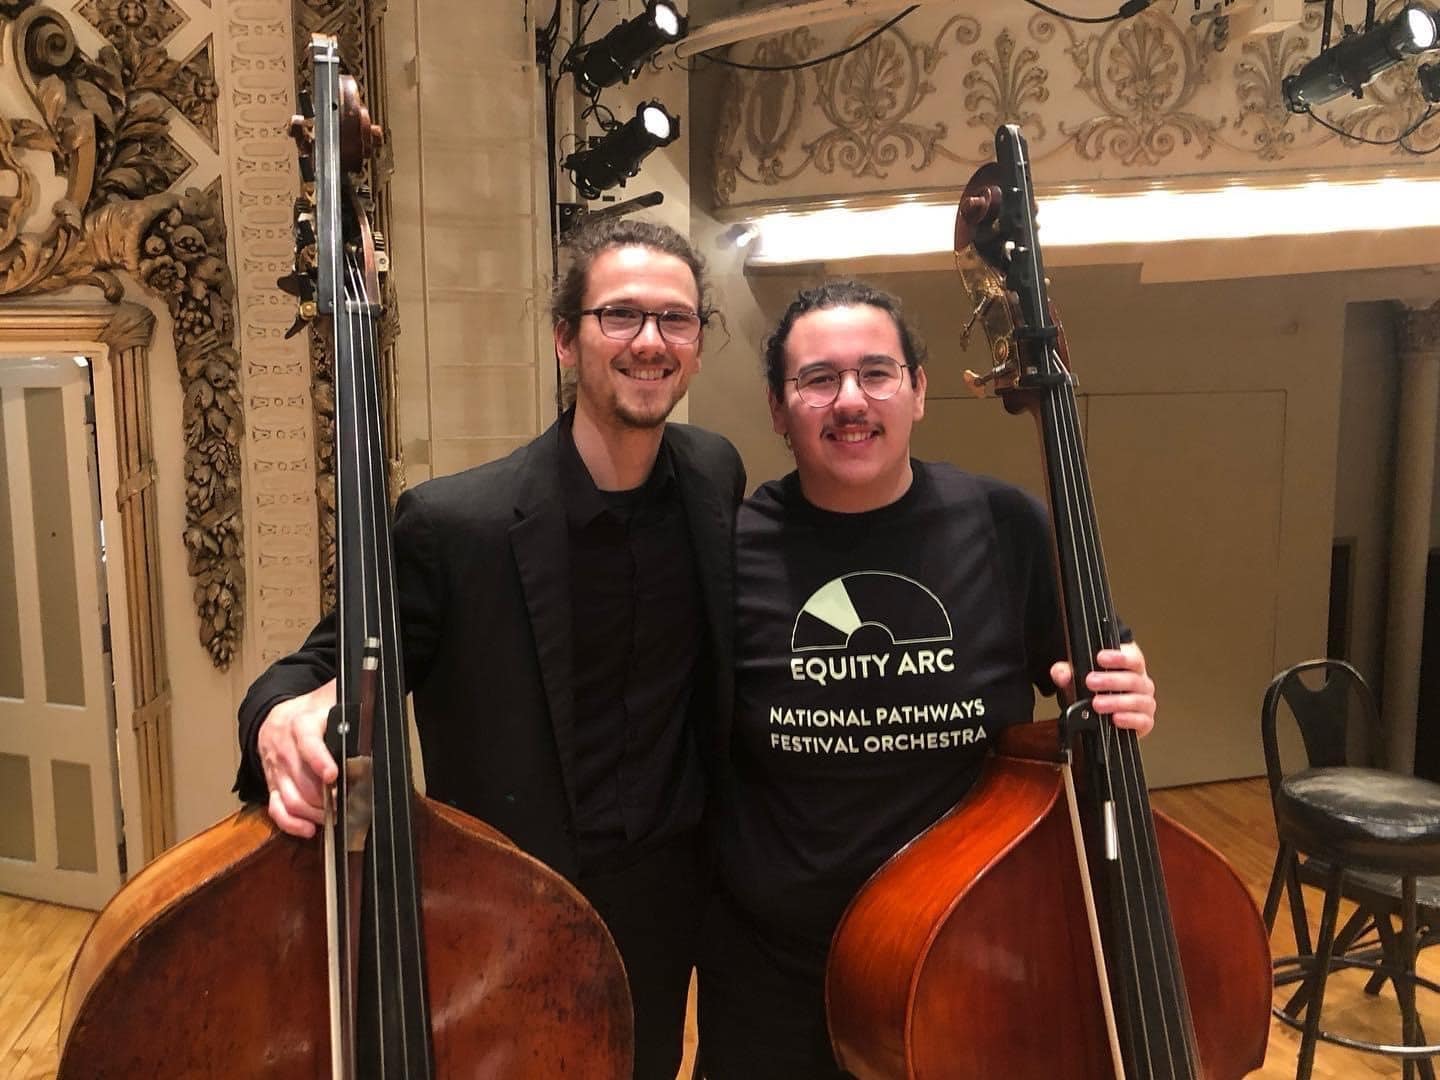 Bass Fellow Mateo Estanislao’s Experience Playing in the National Pathways Festival Orchestra